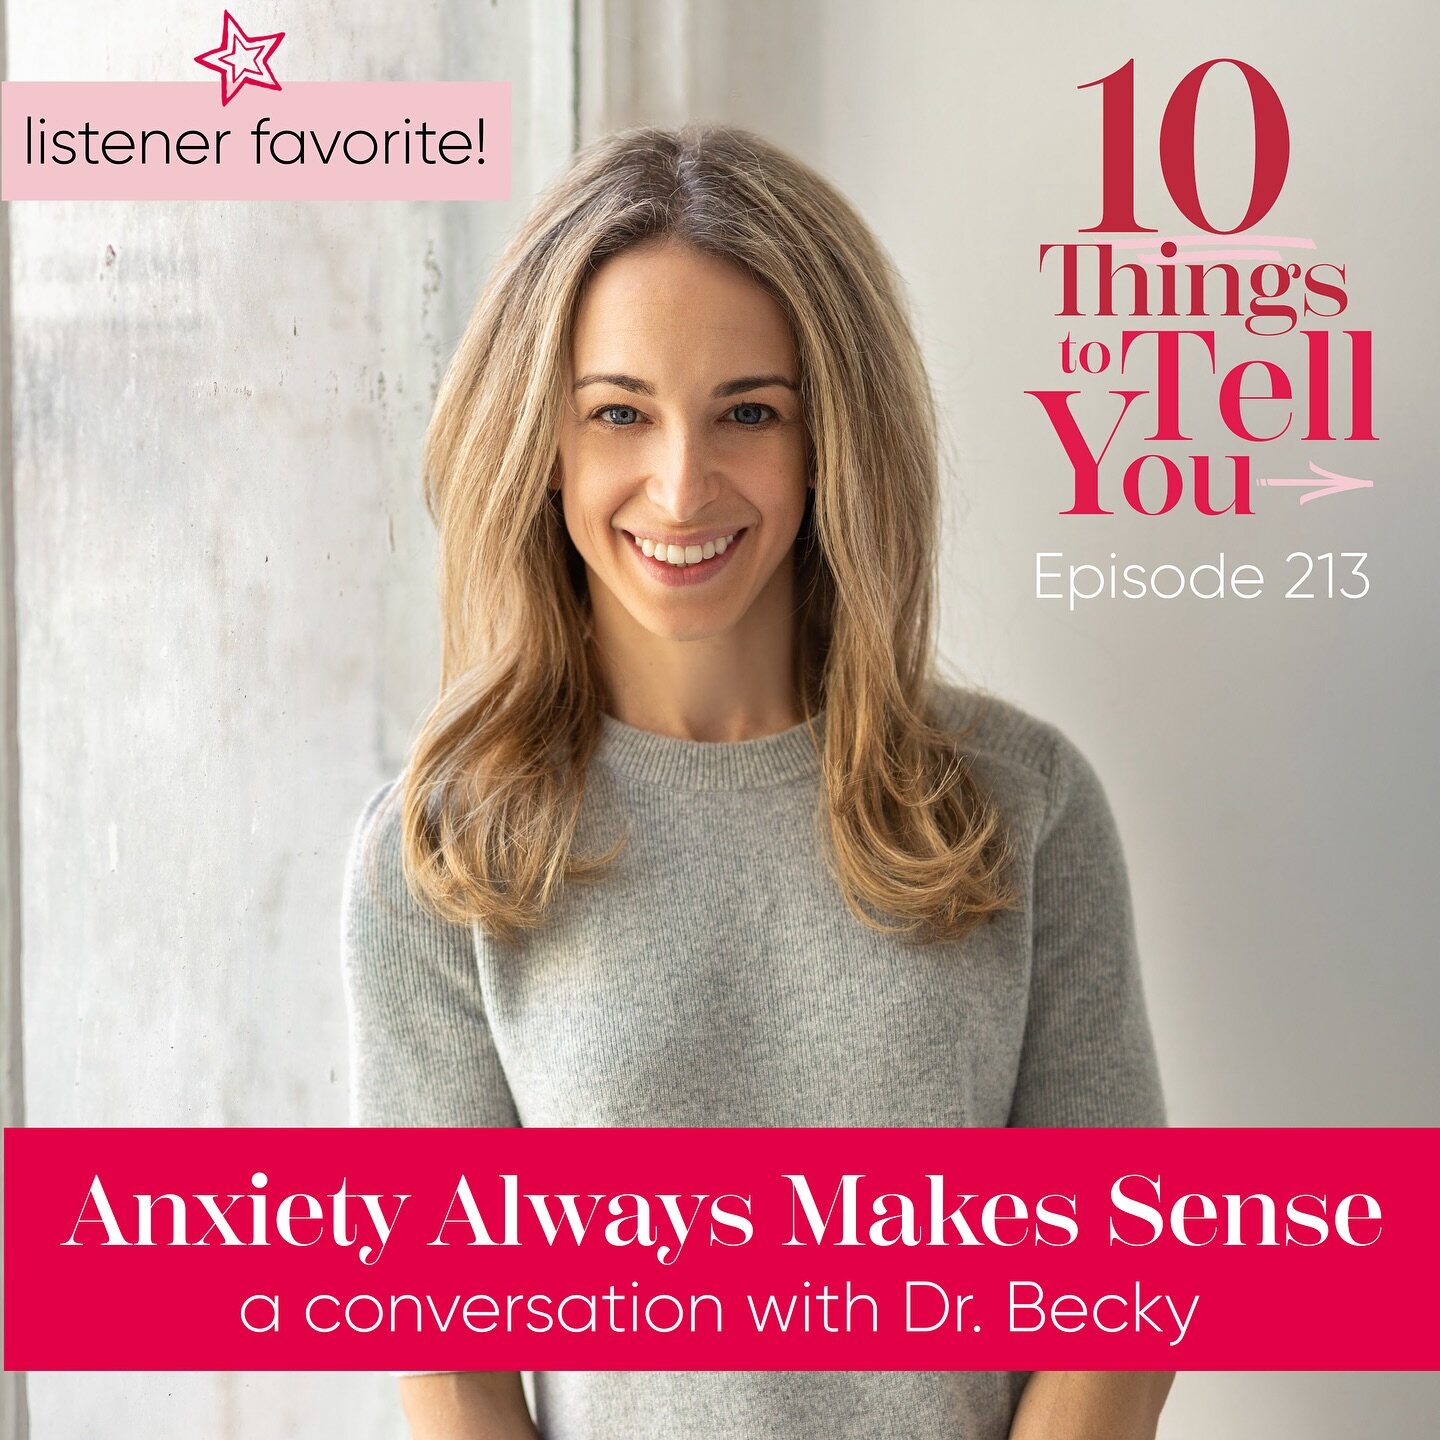 This week we&rsquo;re revisiting one of the most important conversations I&rsquo;ve ever had on microphone. 

Four years ago I stumbled upon a video of @drbeckyatgoodinside talking about how to handle our rising anxieties at the beginning of the pand